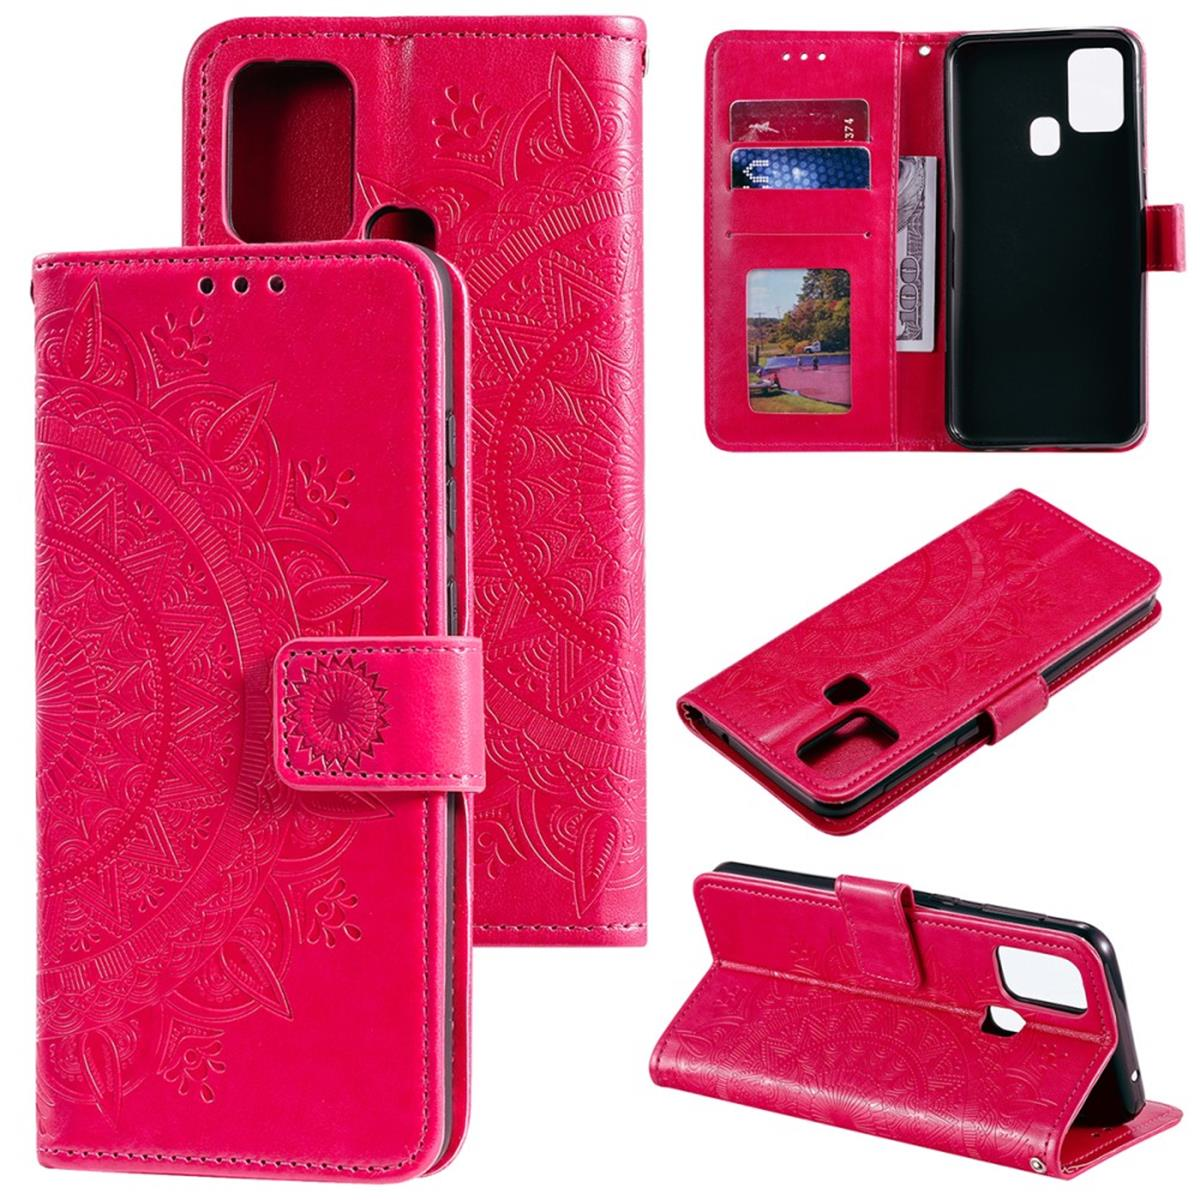 Muster, M21/M30s, Galaxy Mandala COVERKINGZ mit Bookcover, Klapphülle Pink Samsung,